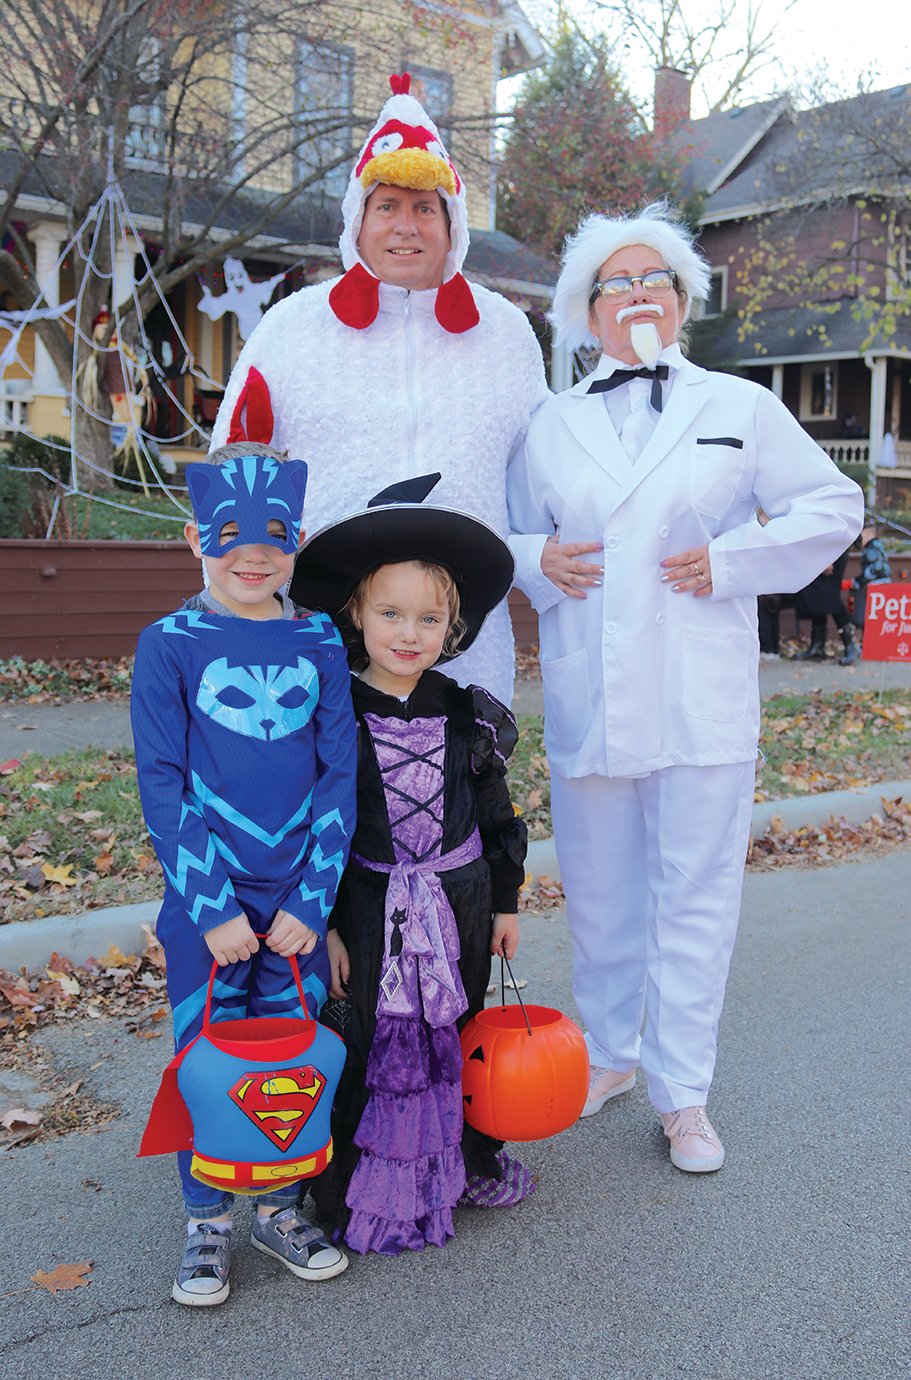 Robert and Olga Brown and grandchildren Conner Brown, 6, and Claira Brown, 4, mosey down Main on Halloween.